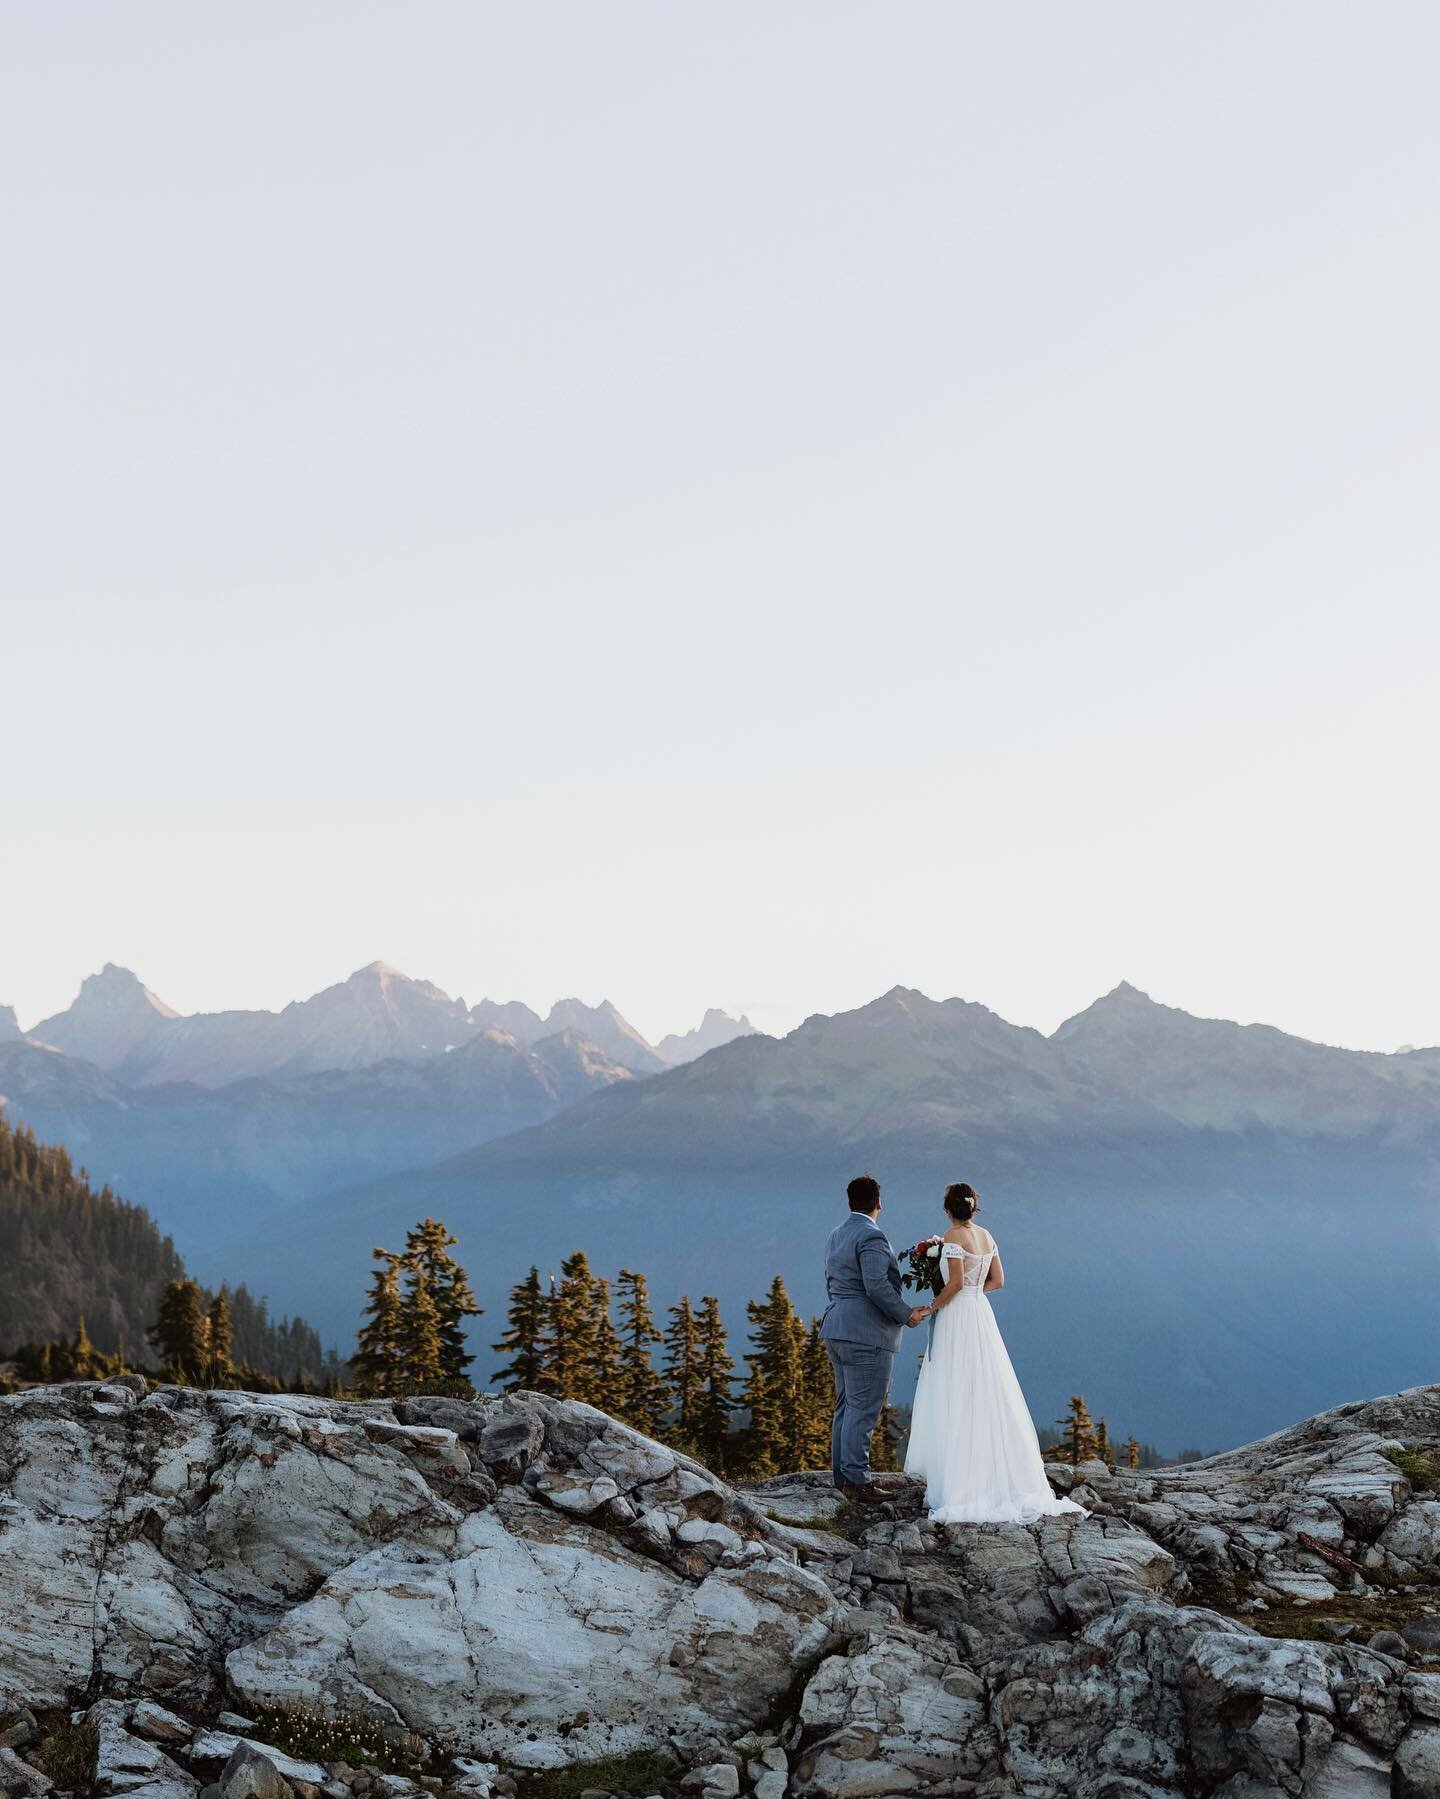 Washington State Mini Adventure Elopement Guide:

Washington State is full of amazing scenery for adventure elopements. From beautiful mountain views (IMO some of the best in the country), to lush green forests, rocky coastlines, and amazing wildflow